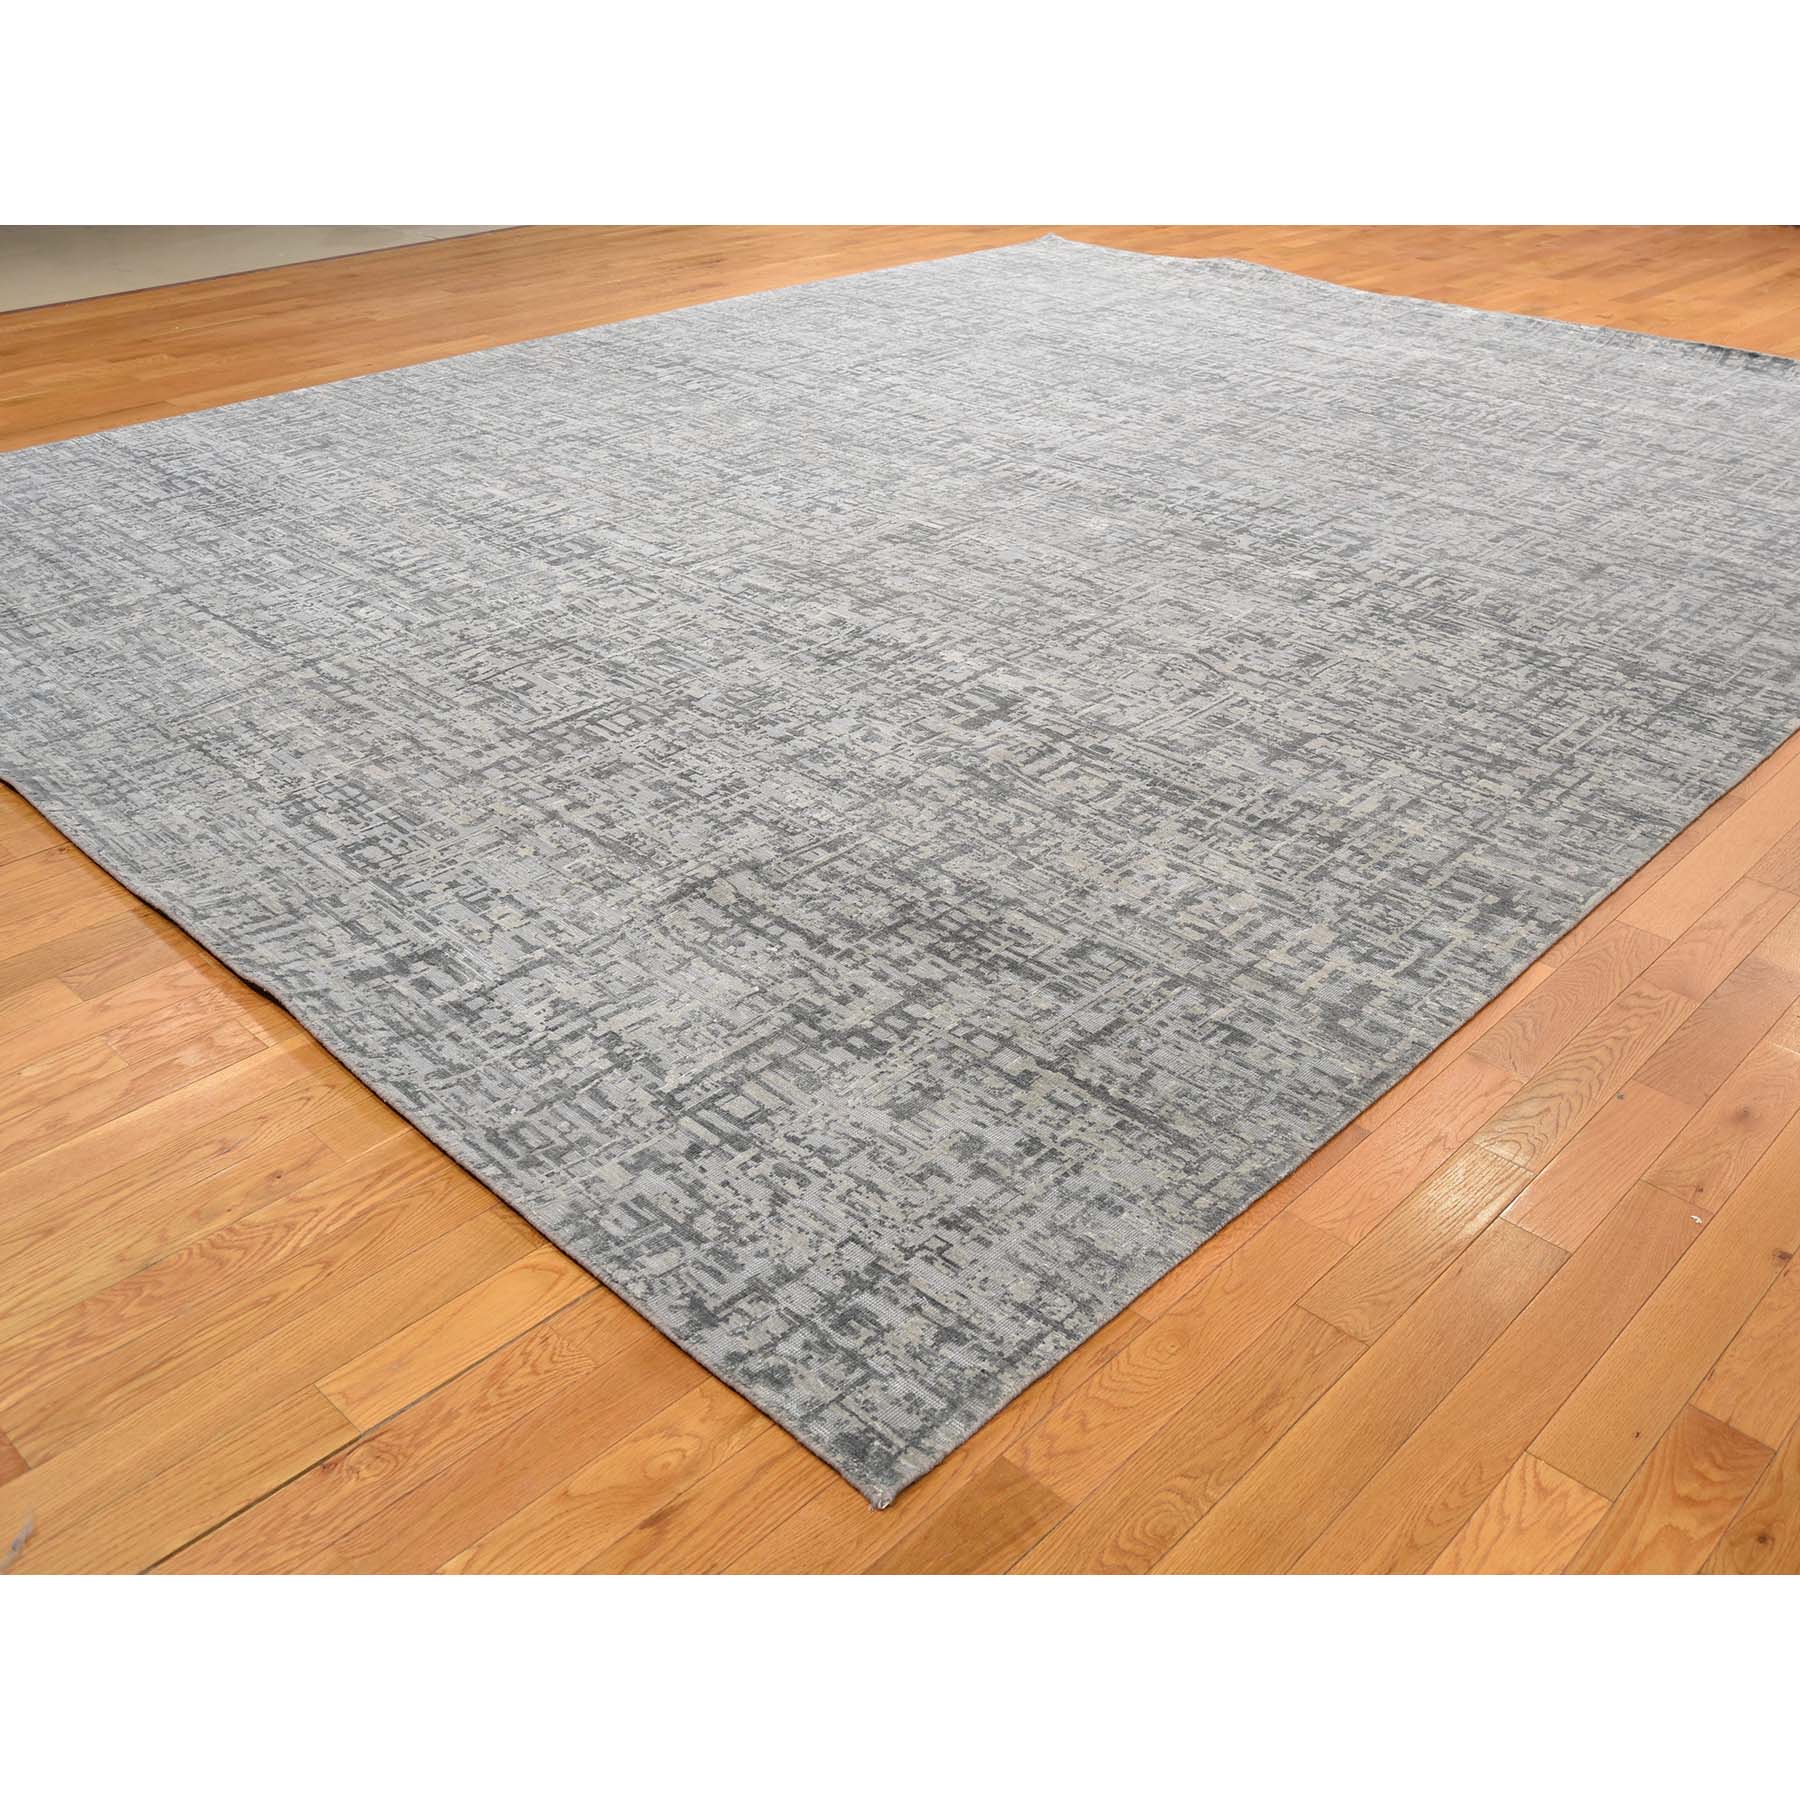 12-1 x15-3  THE MATRIX Pure Silk with Textured Wool Tone on Tone Hand-Knotted Rug 